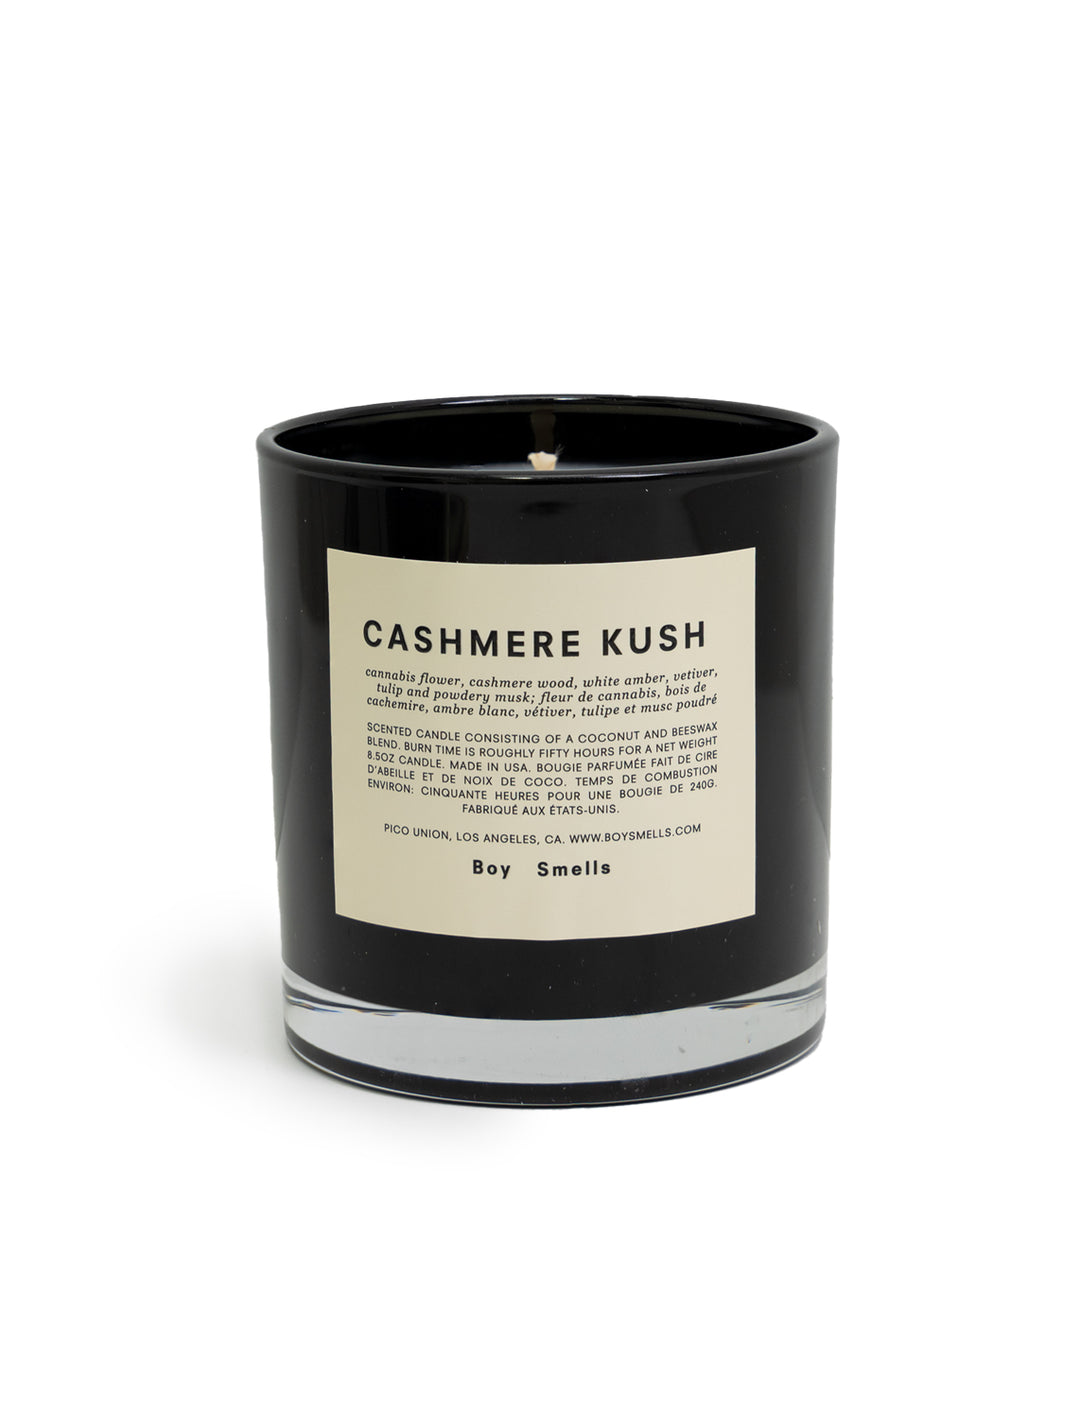 Front view of Boy Smells' Cashmere Kush candle.